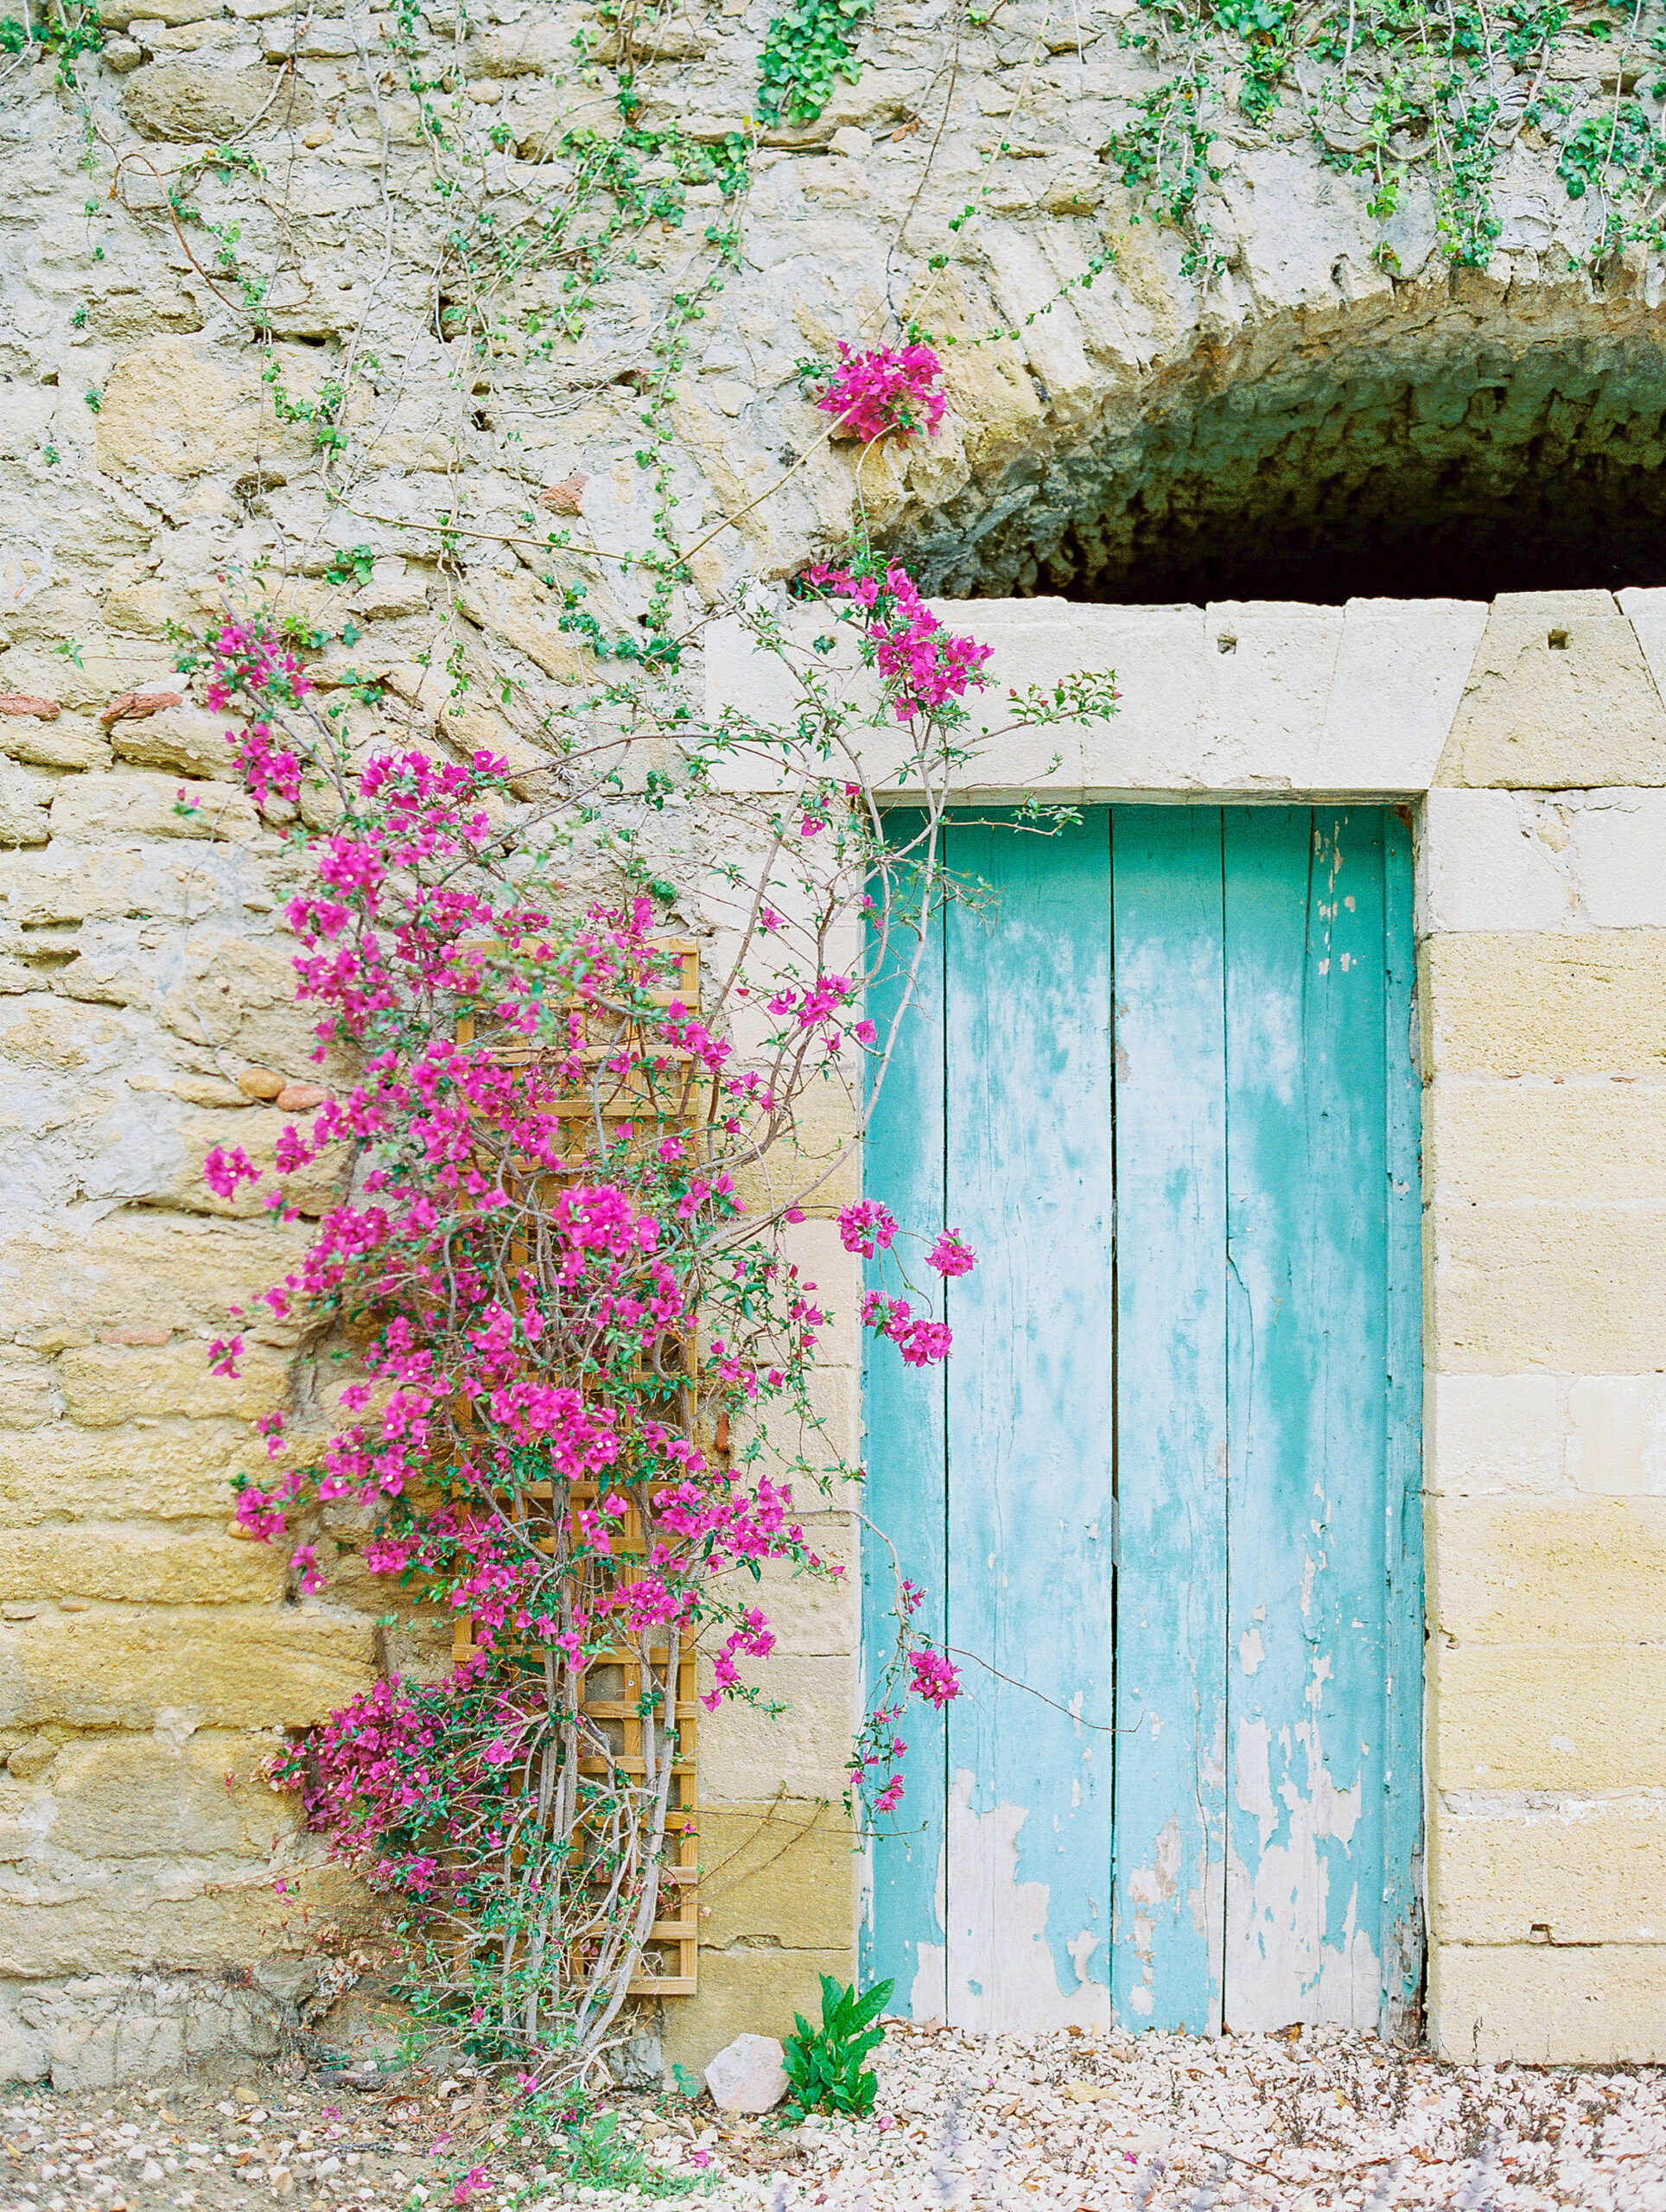 summer in provence Bougainvillea in bloom next to turquoise doors